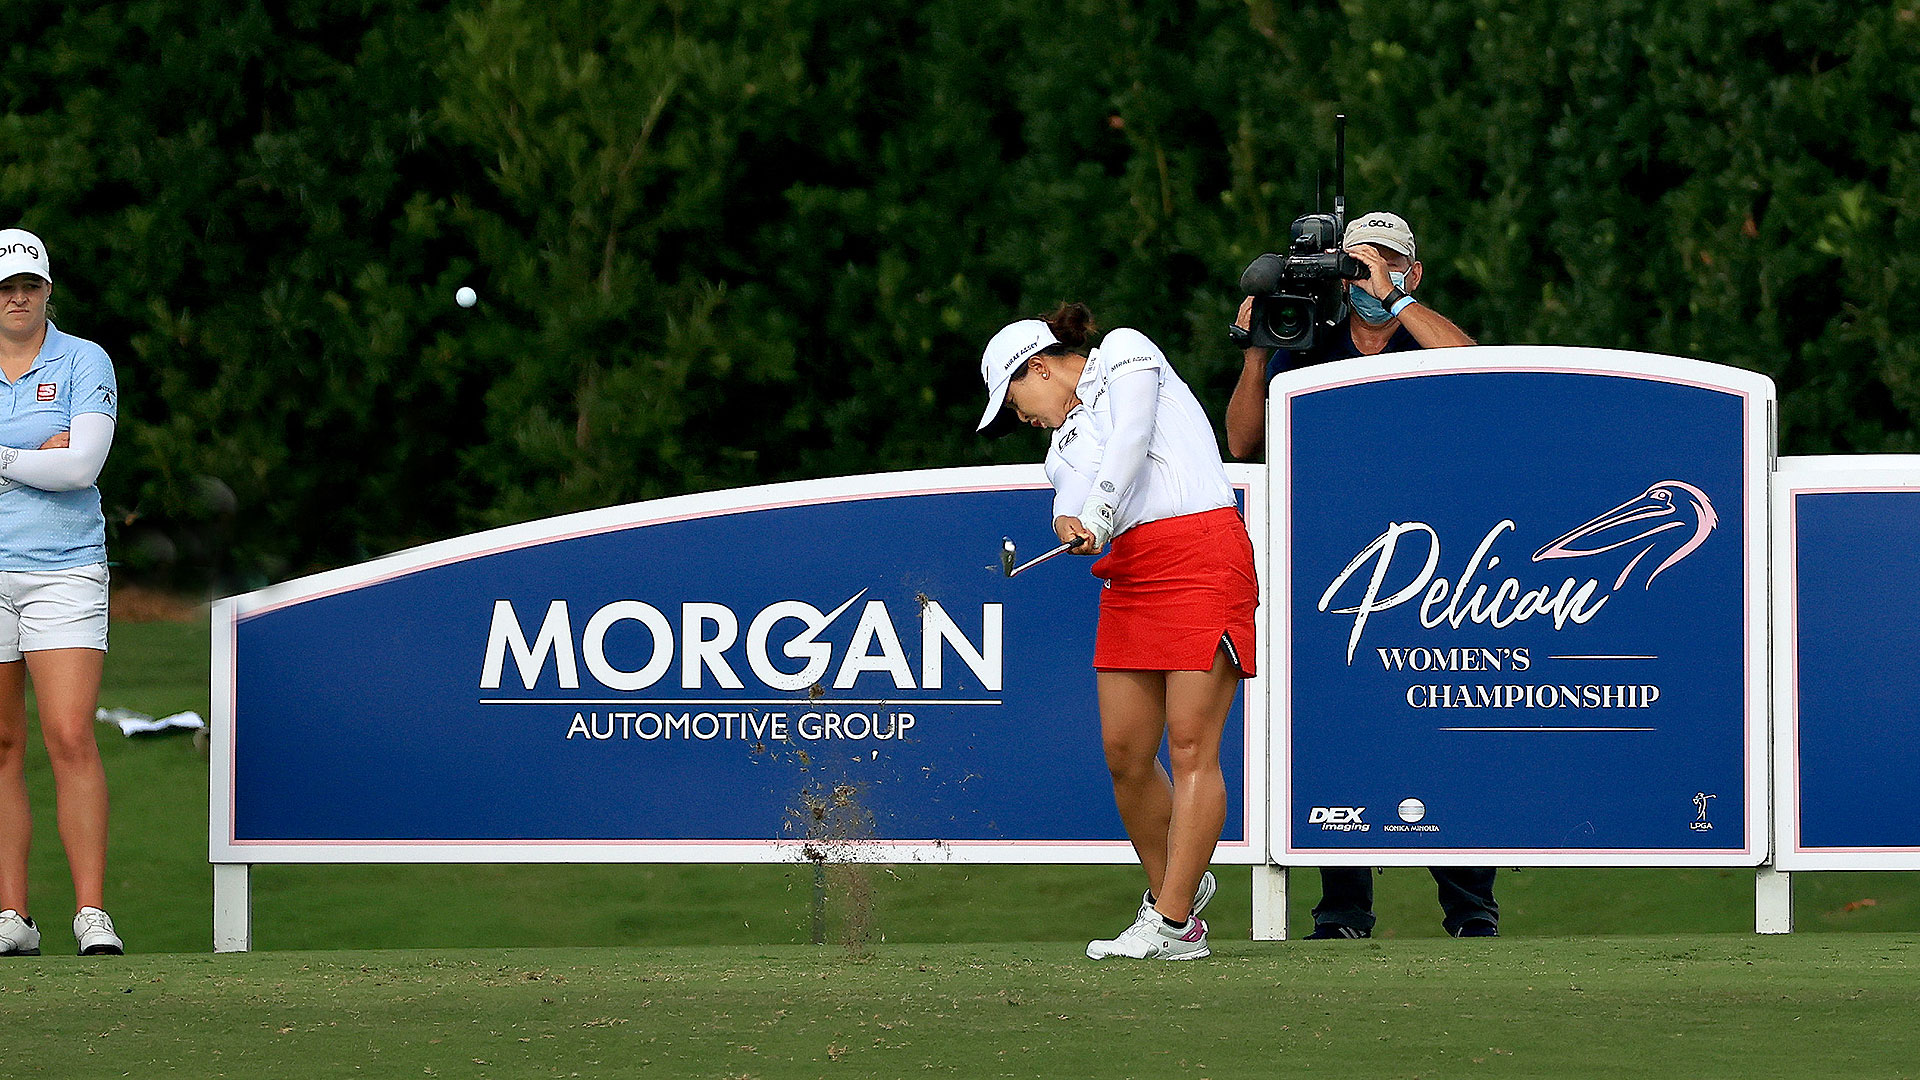 Thursday’s play canceled at Pelican, event reduced to 54 holes due to Hurricane Nicole